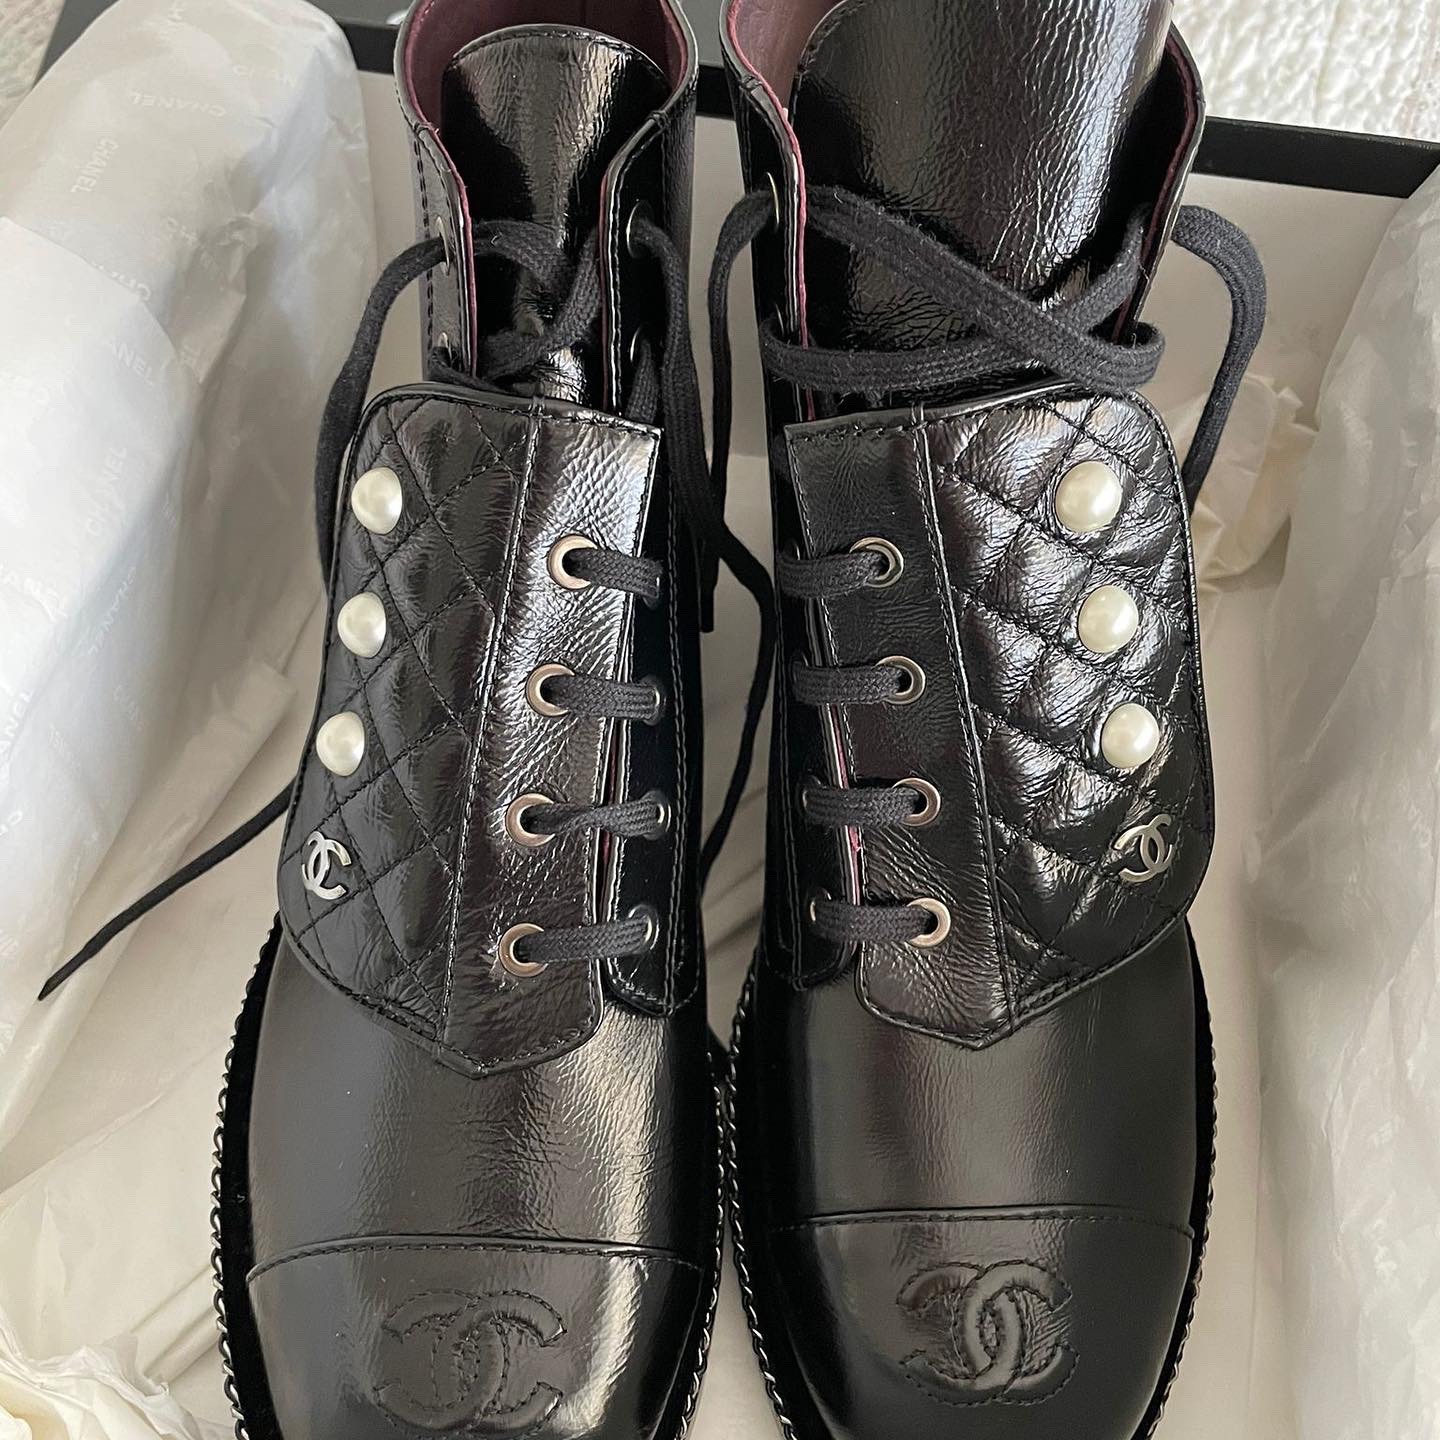 BN AUTHENTIC CHANEL COMBAT BOOTS WITH PEARLS – Mi Reyna Fashion Lover